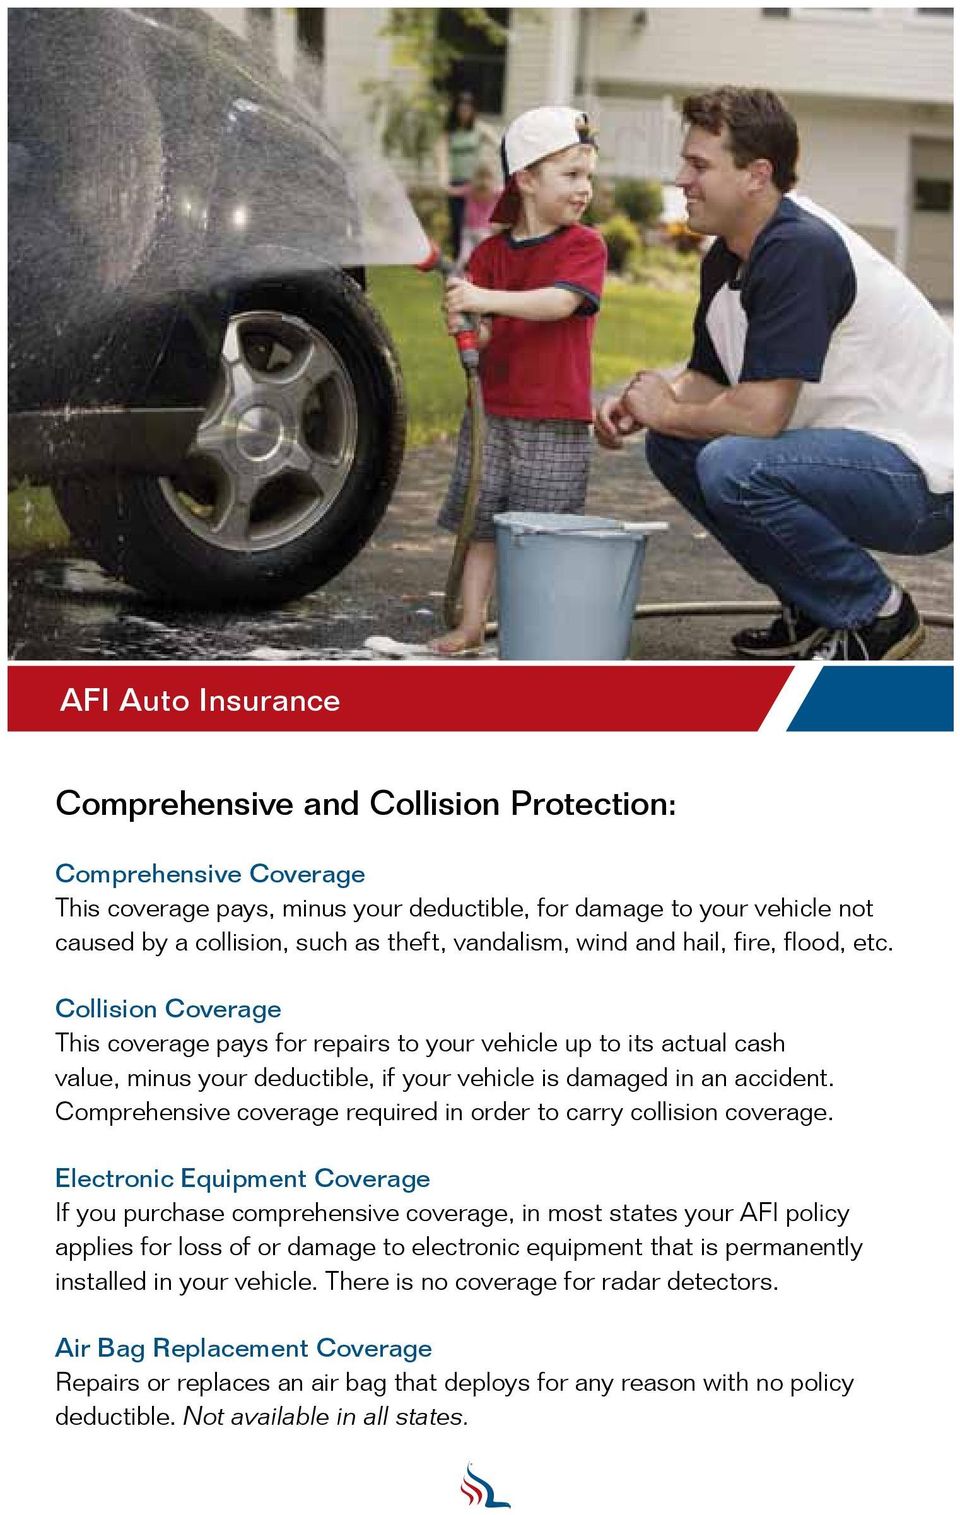 Collision Coverage This coverage pays for repairs to your vehicle up to its actual cash value, minus your deductible, if your vehicle is damaged in an accident.